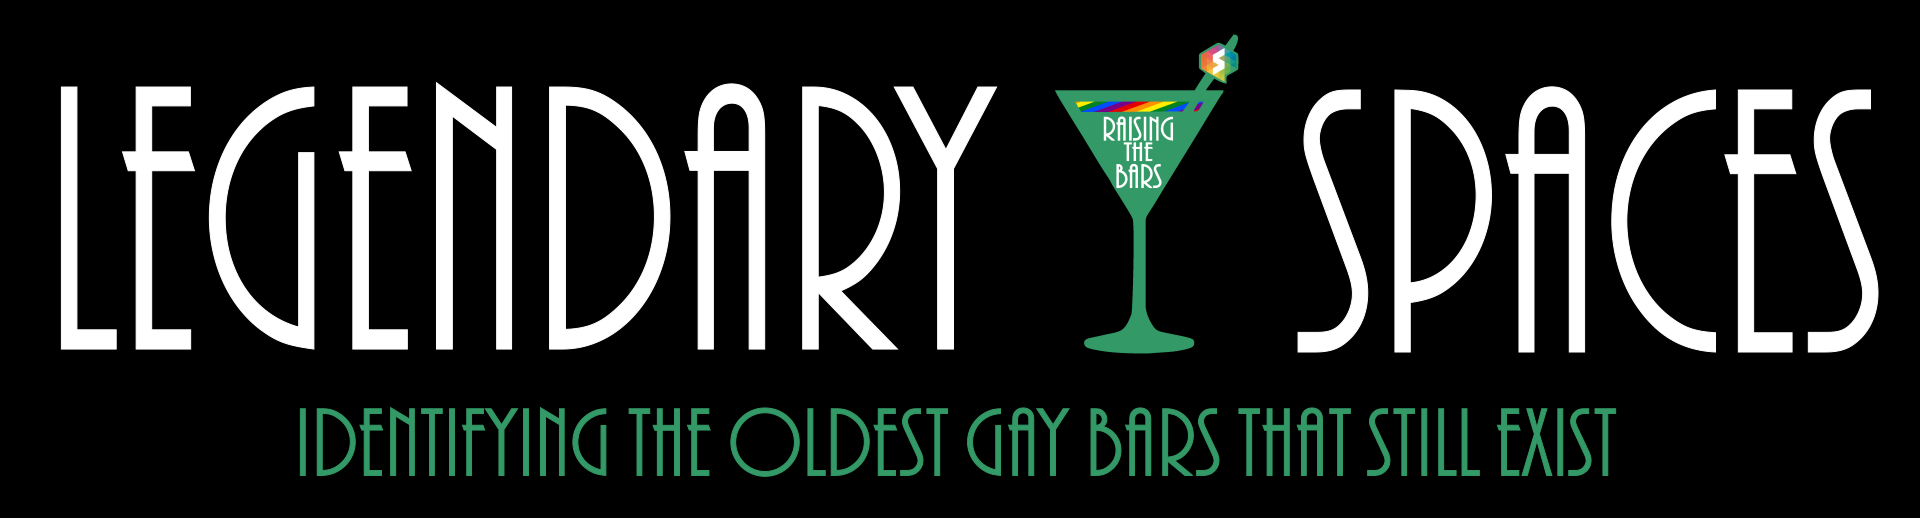 One of the projects we have undertaken is to identify those legendary bars that have served the LGBTQ+ community for decades and who continue to serve us in 2023. We have identified more than 30 gay bars that have operated for at least 50 years - over 20 that predate the Stonewall uprising. #RaisingTheBars #gayhistory #ilovegaybars